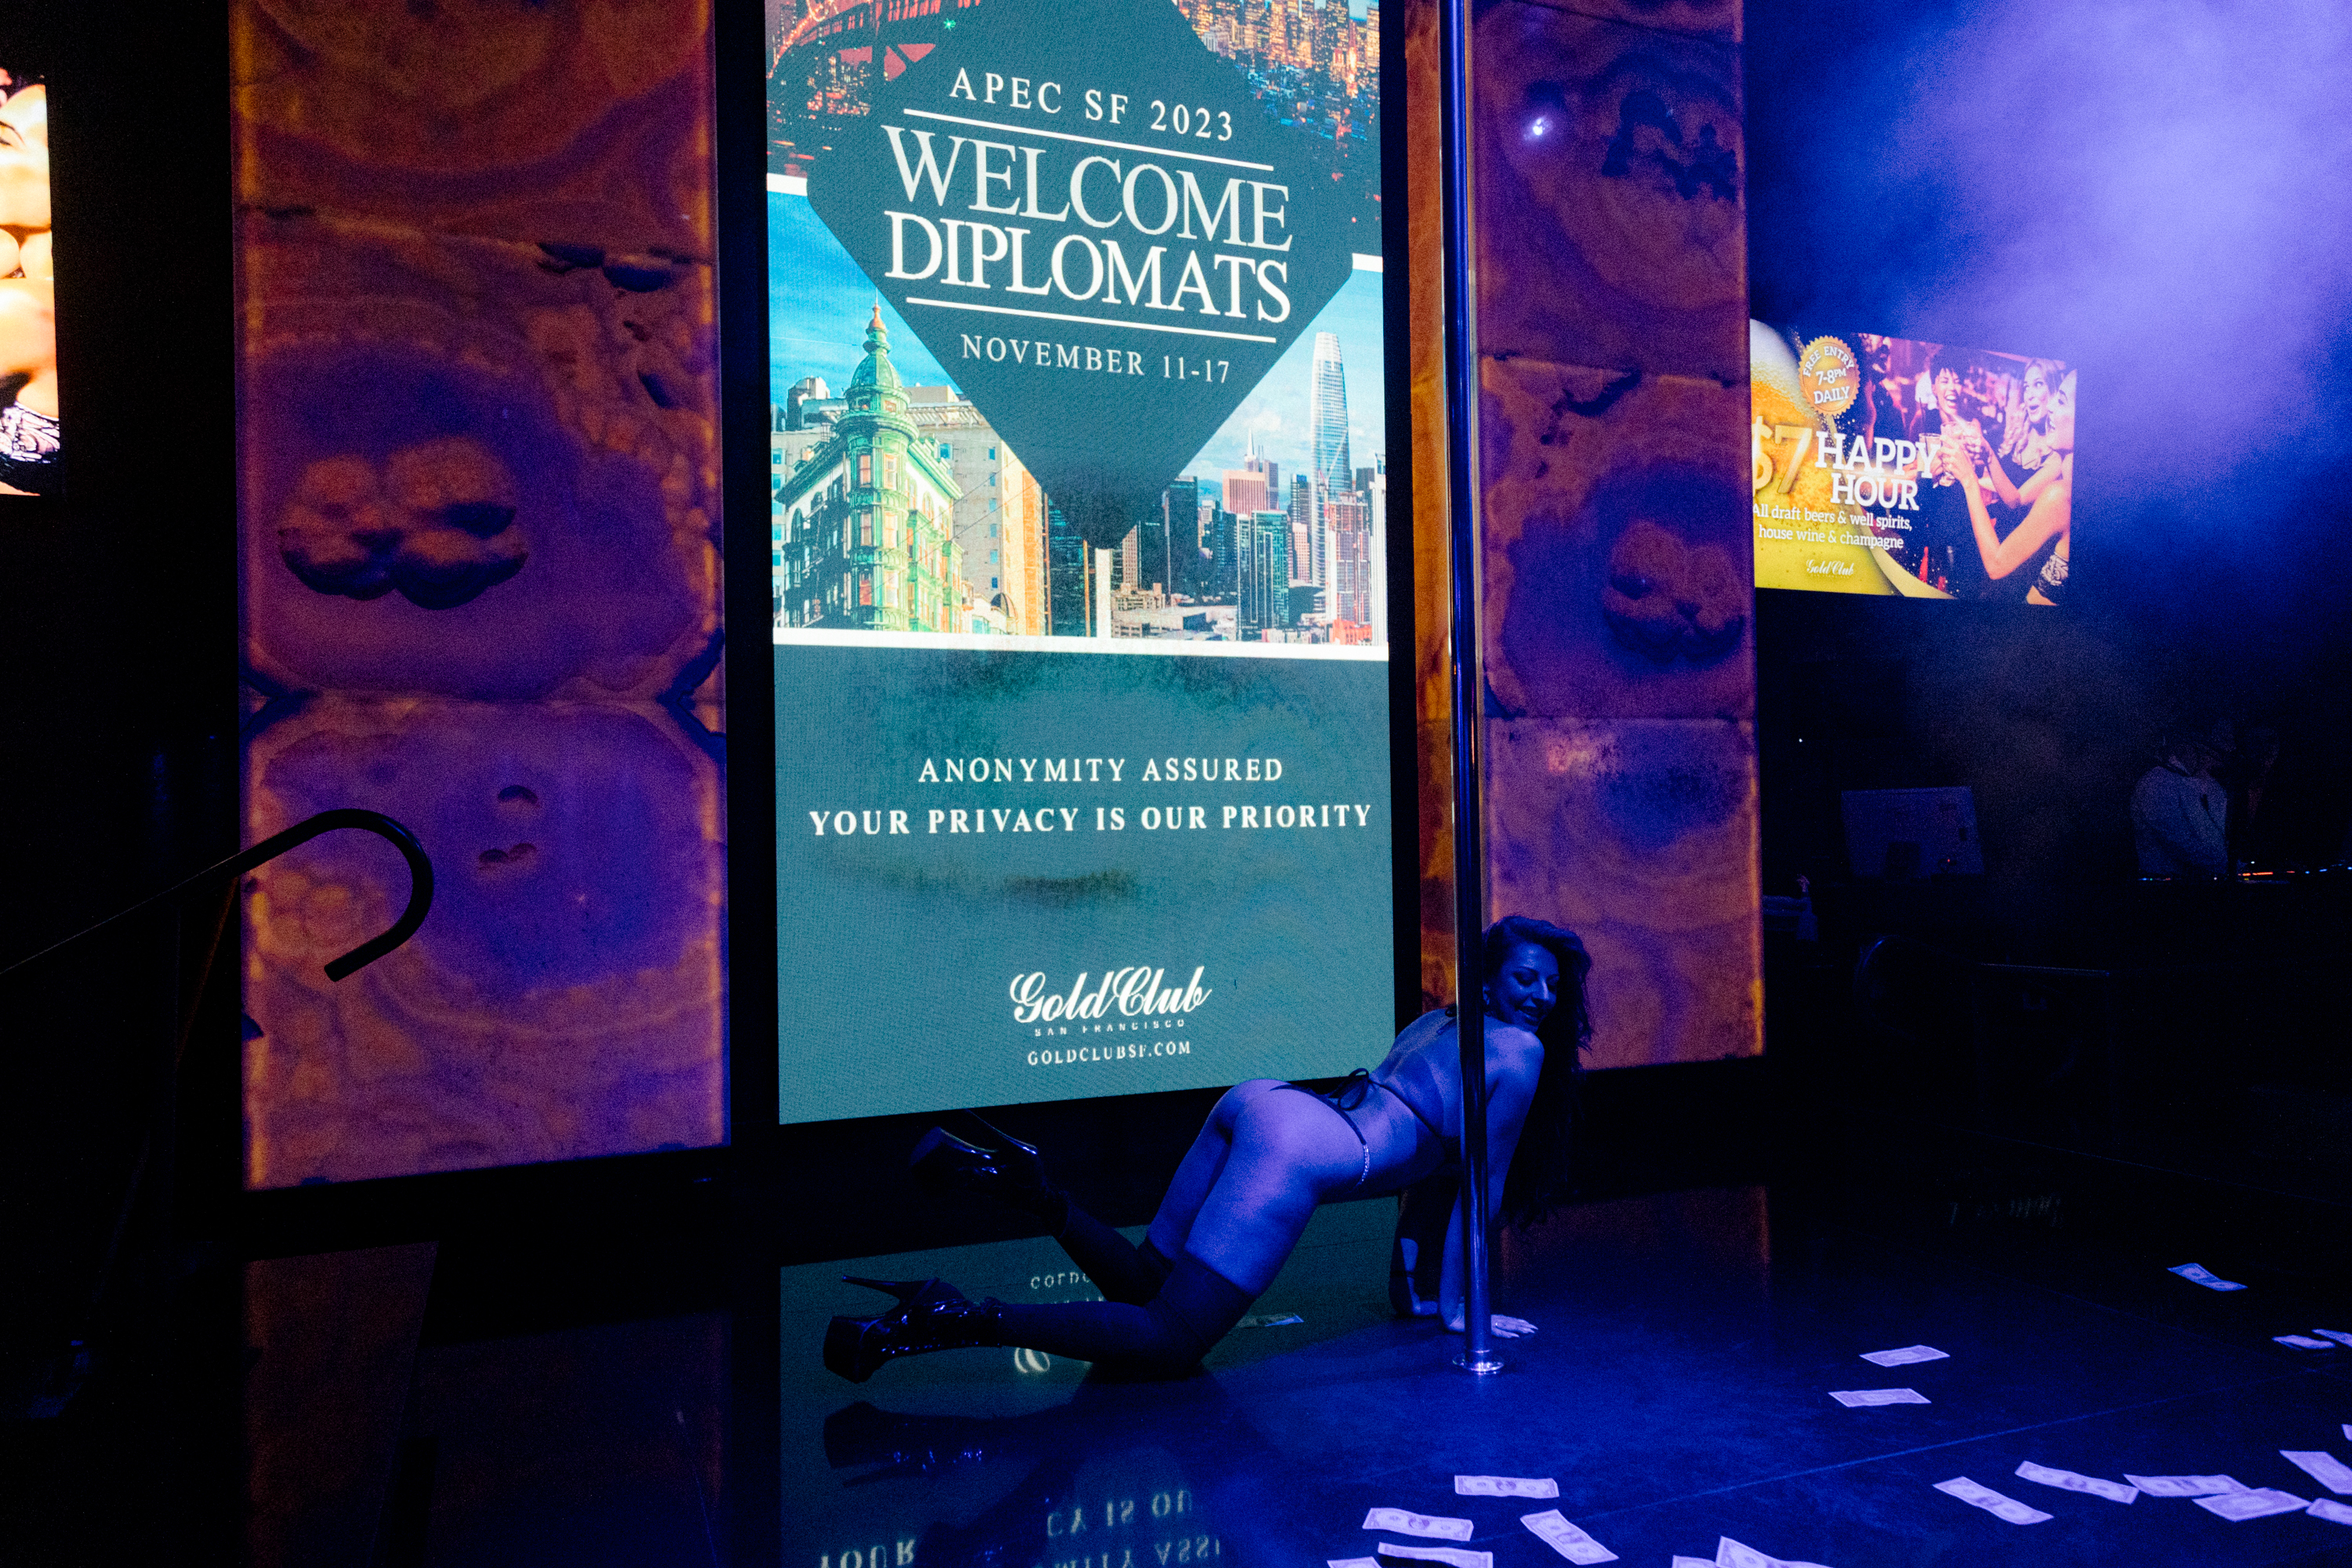 An exotic dancers is on her hands and knees in the middle of the dance floor with dollar bills on the ground and a LCD screen that reads &quot;Welcome Diplomats - APEC SF 2023 - November 11-17&quot;